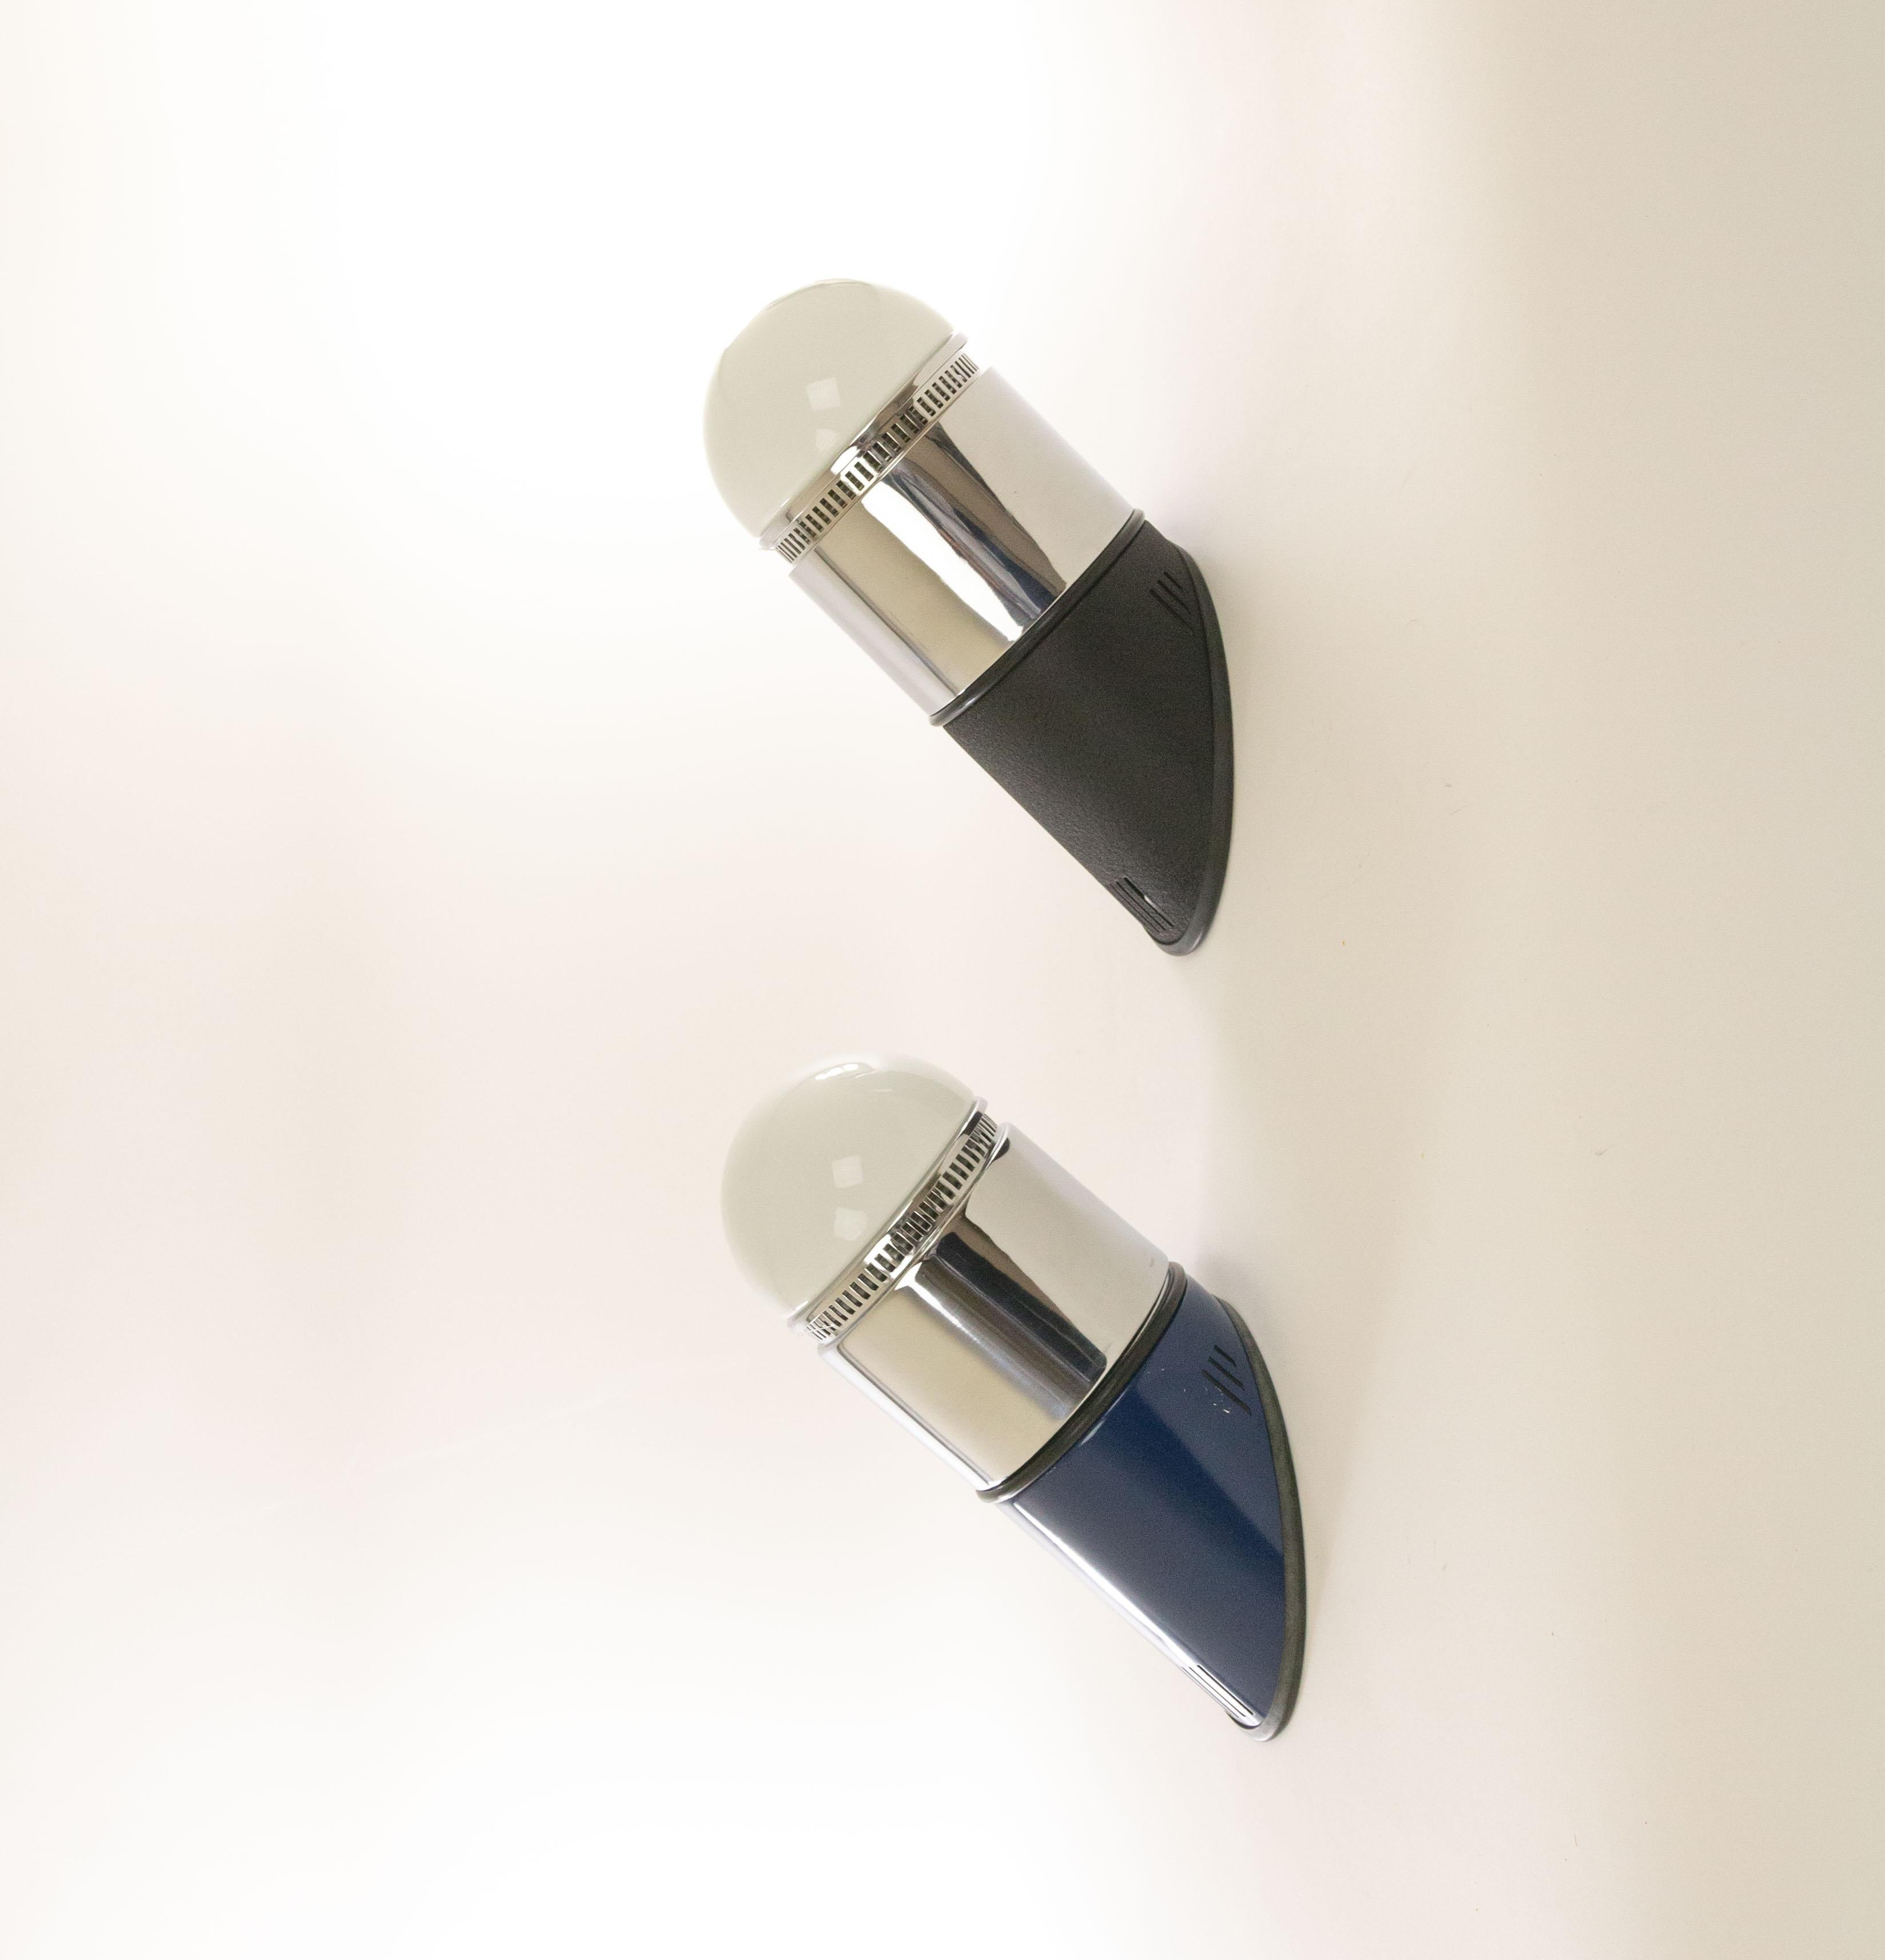 Blue and black pair of Sisten wall lamps designed by Gianni Celada and produced by Fontana Arte, 1973.

These wall lamps are part of the Sisten series; consisting of various wall and ceiling lamps, all with (interchangeable) opaline glass and